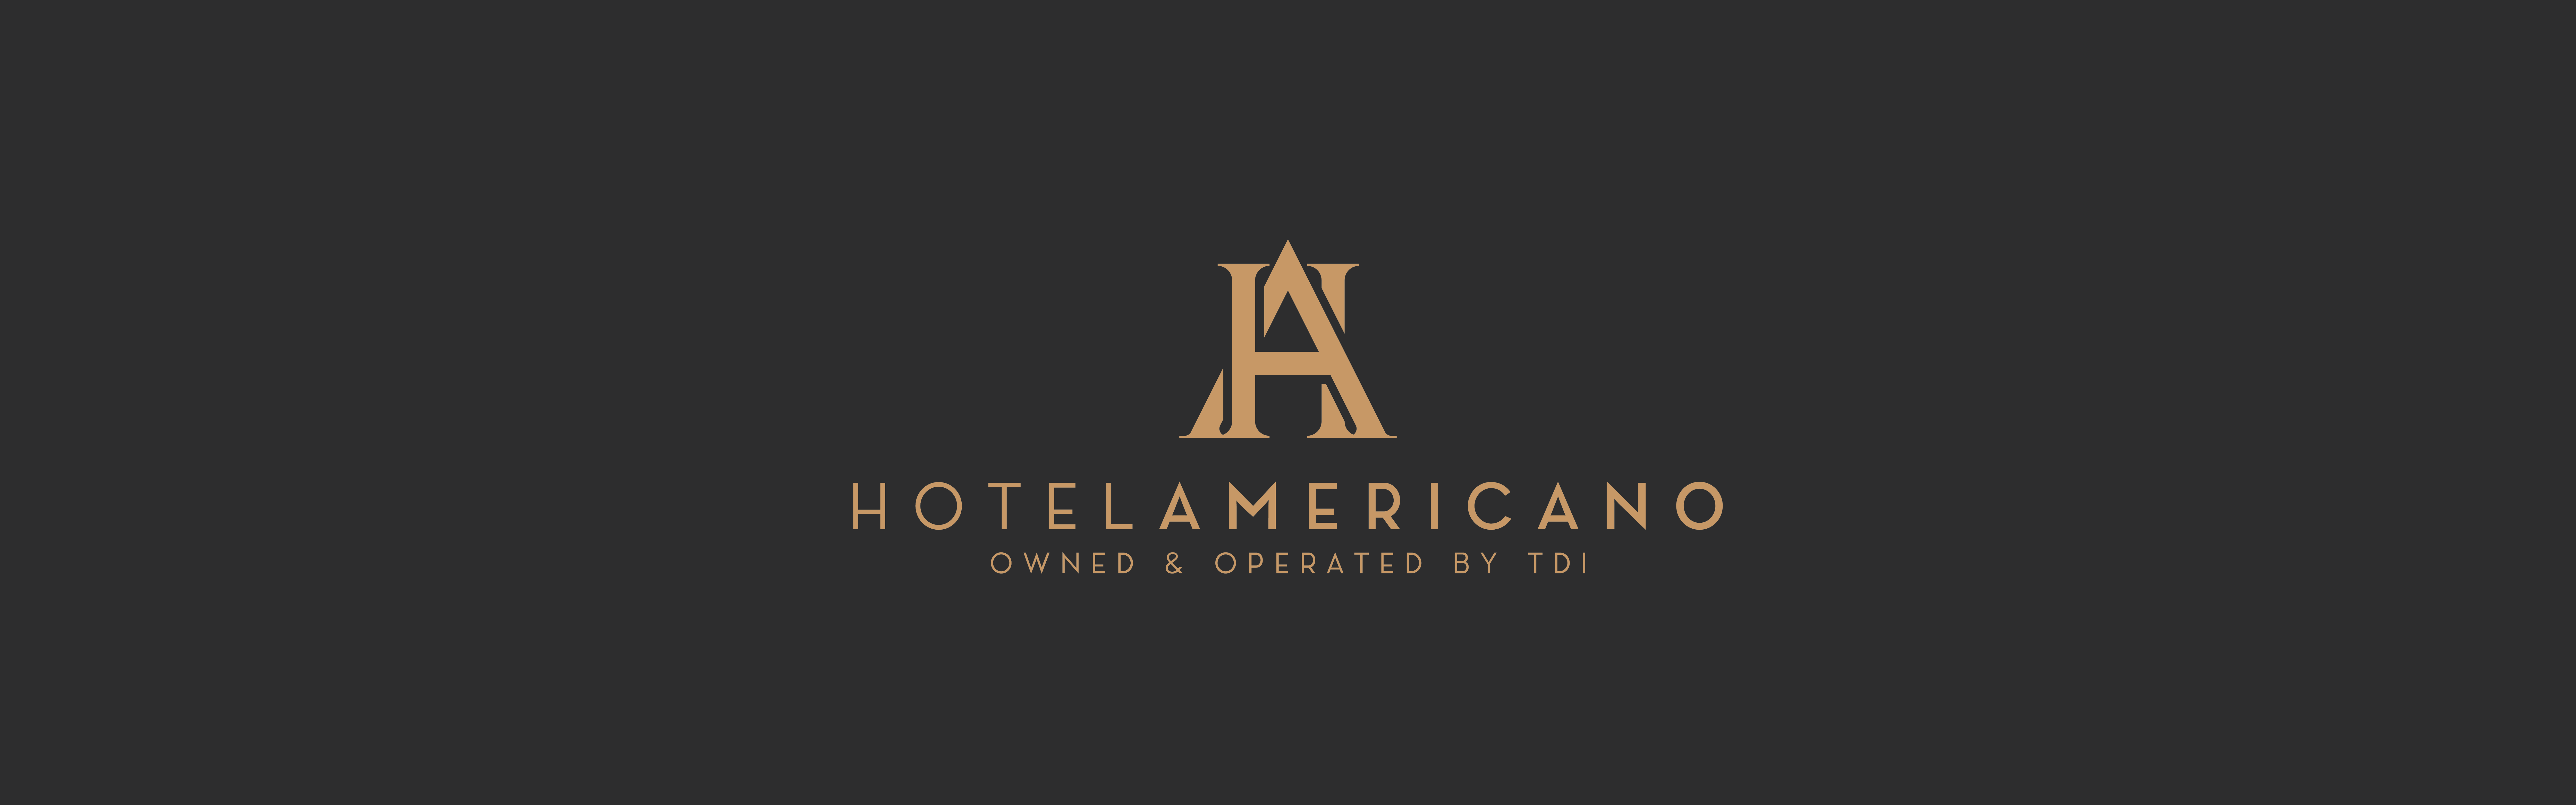 The image showcases a logo for "Hotel Americano," specified as being owned and operated by TDI, set against a dark background with the letter 'A' prominently stylized above the text.